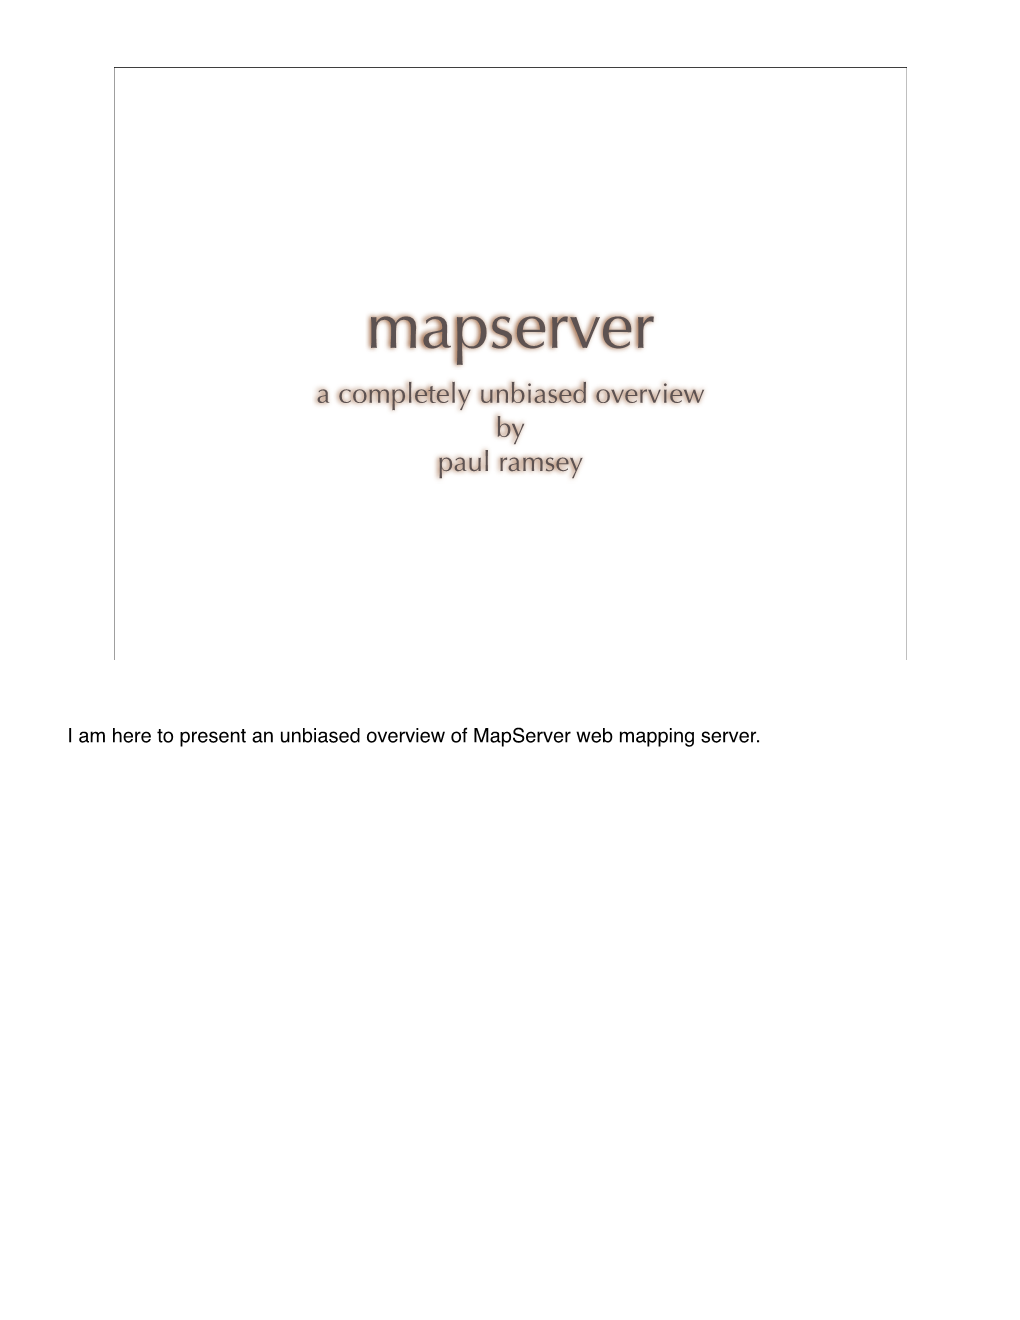 Mapserver a Completely Unbiased Overview by Paul Ramsey